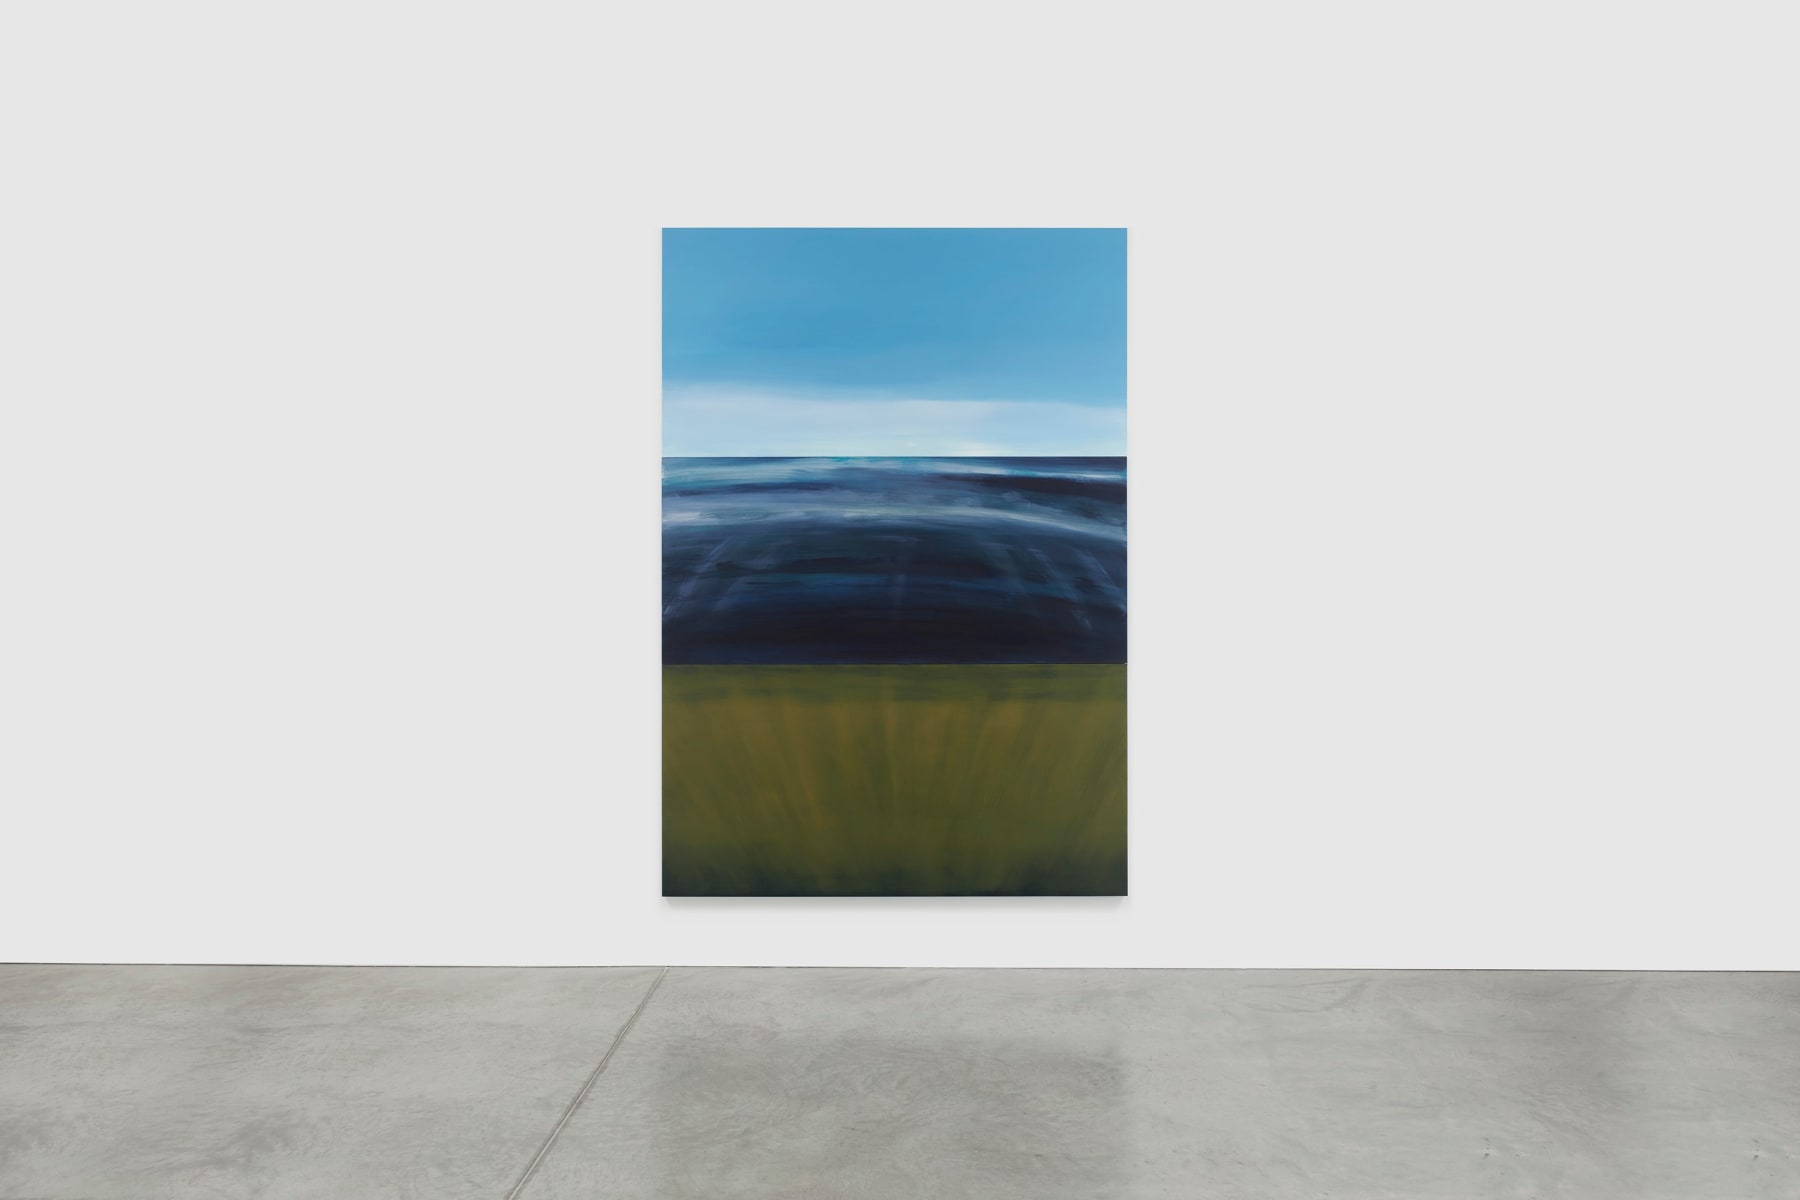 A three sectioned abstract painting depicting the light blue sky, the ocean in a dark blue color, and the ocean in yellowish green color